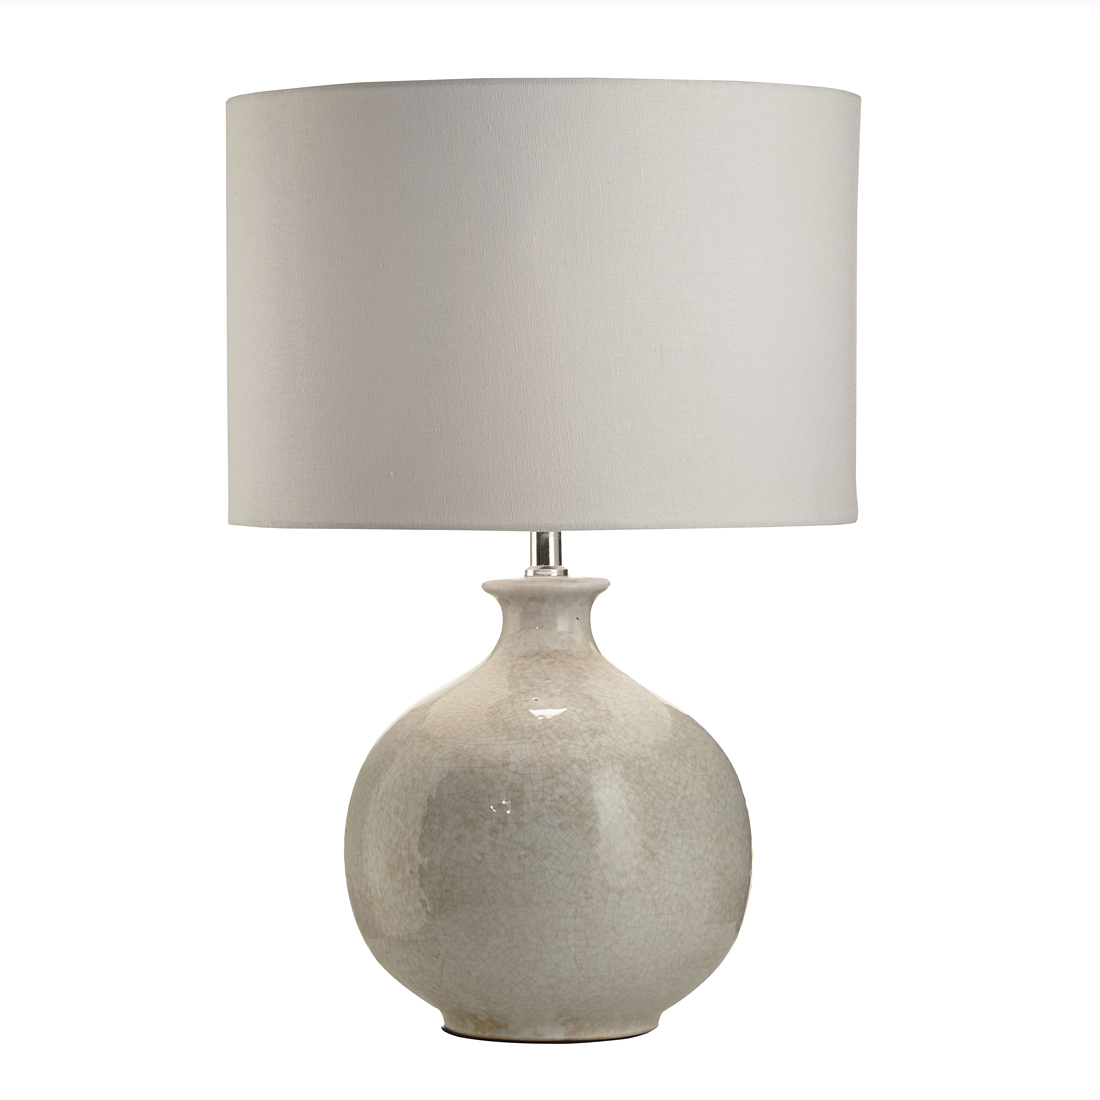 Round Crackle Glaze Table Lamp with regard to size 1100 X 1100